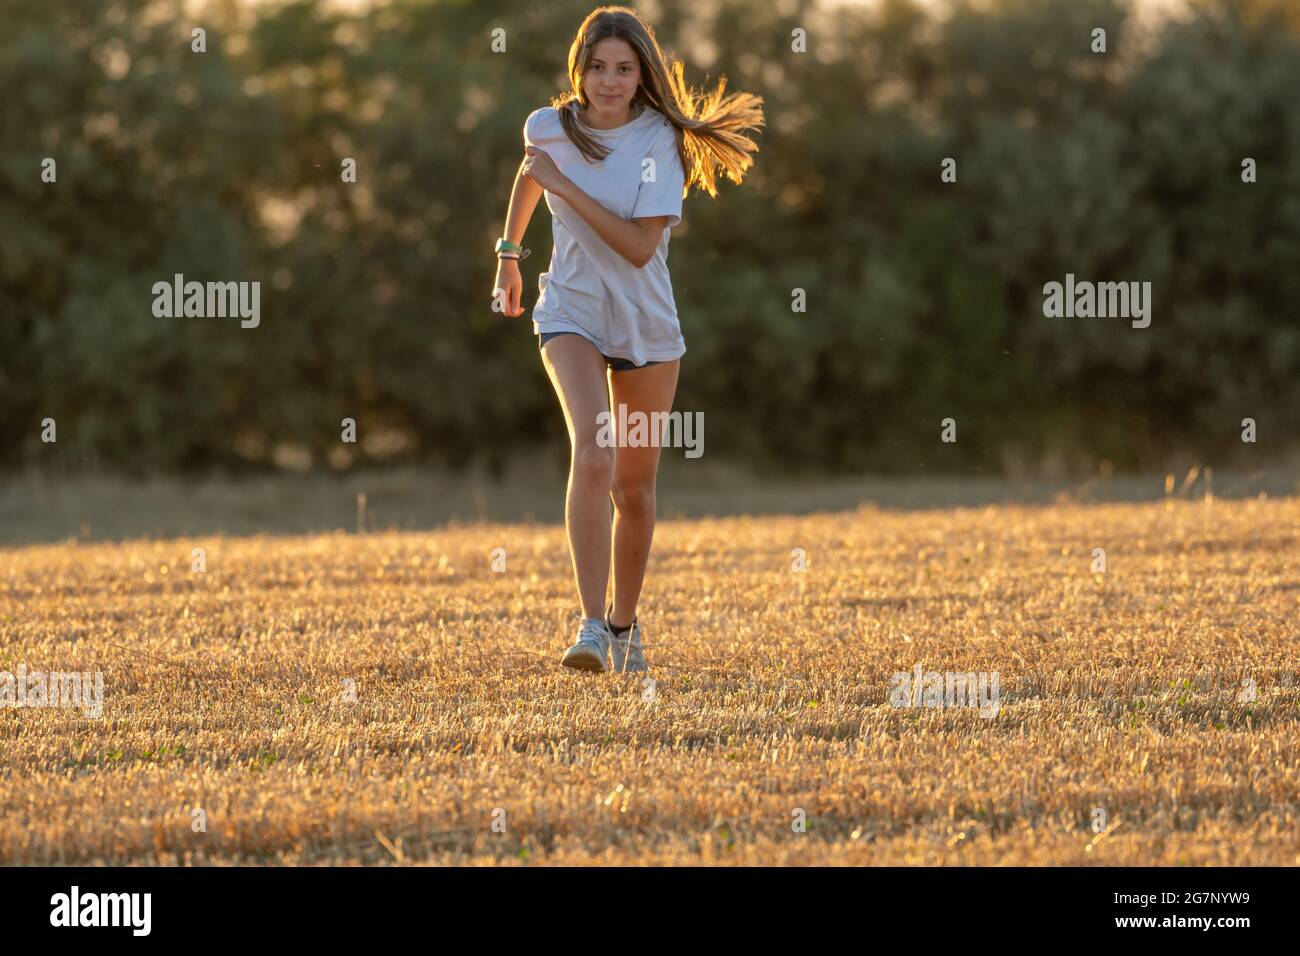 teenage girl with long blonde hair, shorts and white t-shirt running facing the camera through a harvested field. Playing sports in the field. Stock Photo